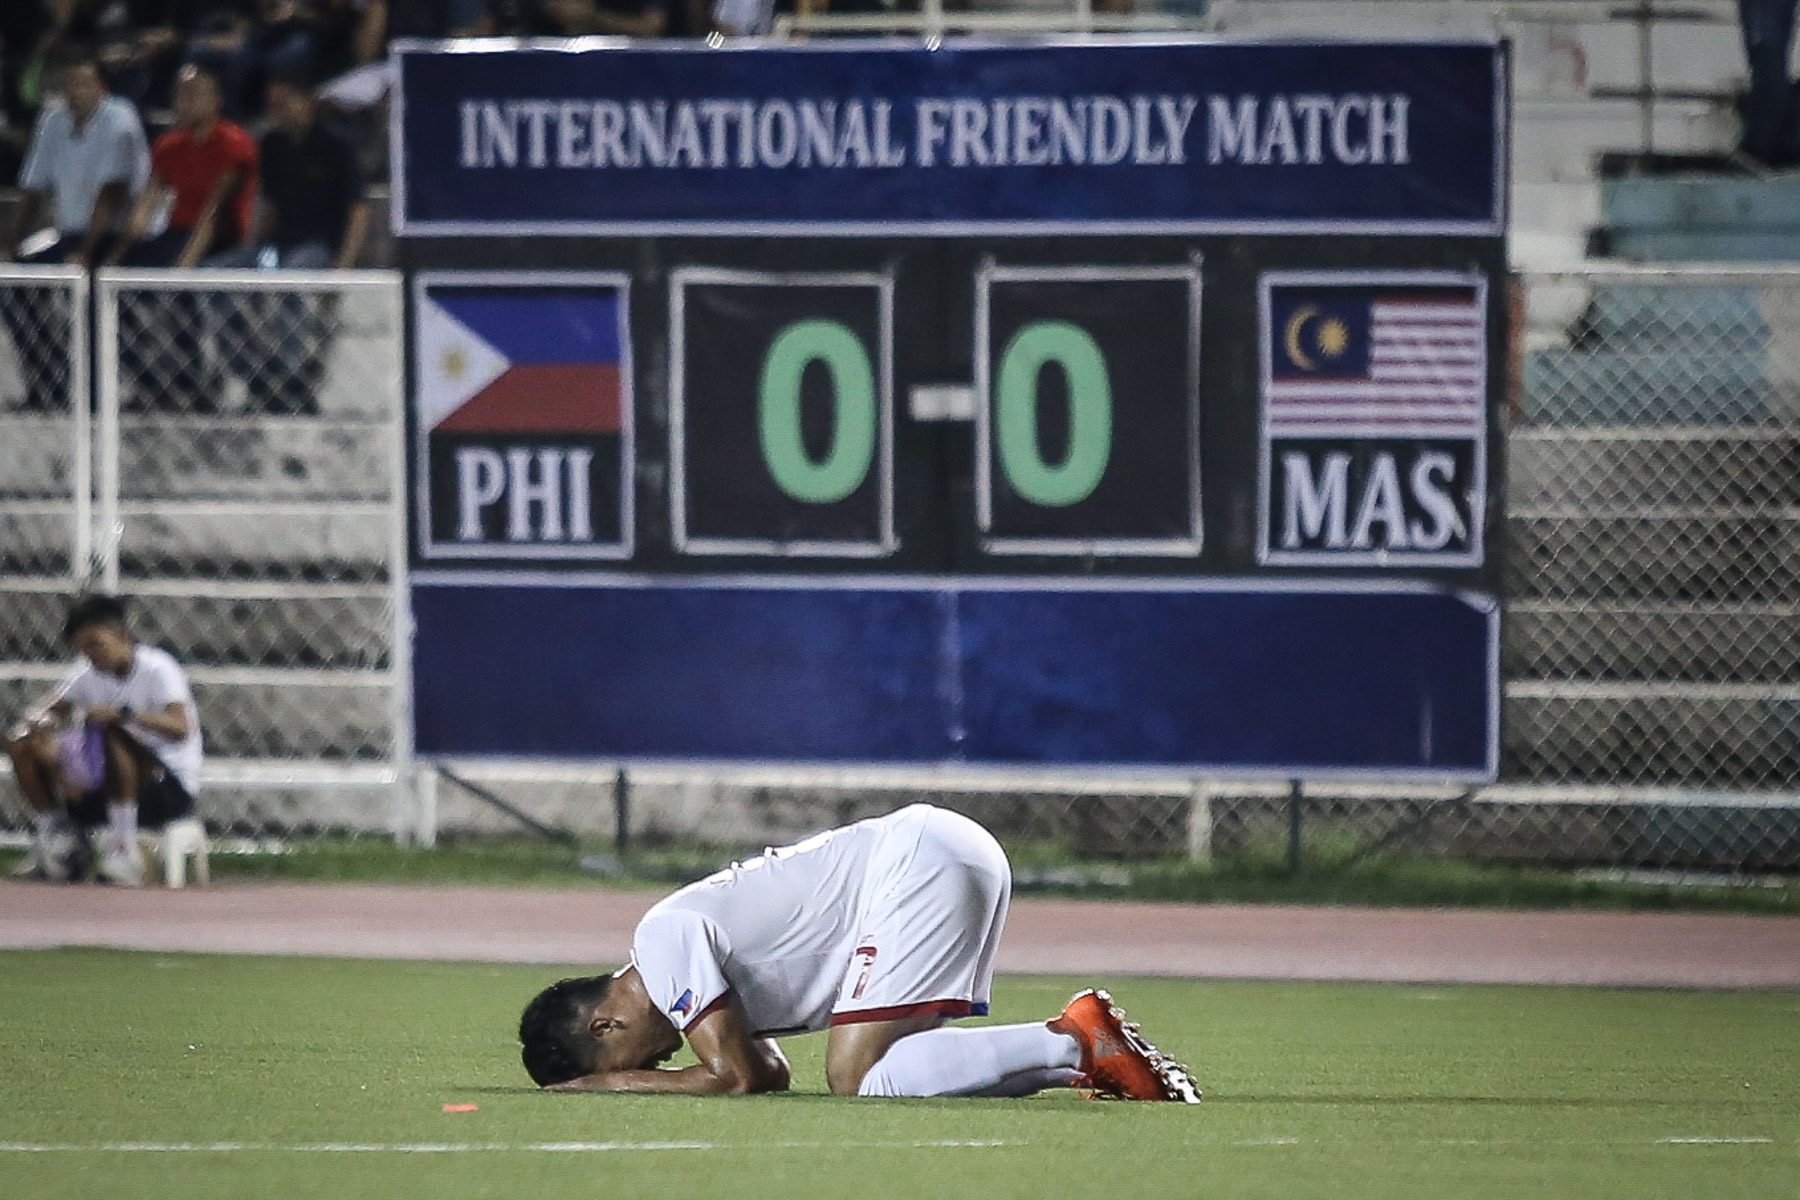 After Malaysia draw, Azkals remain a work in progress